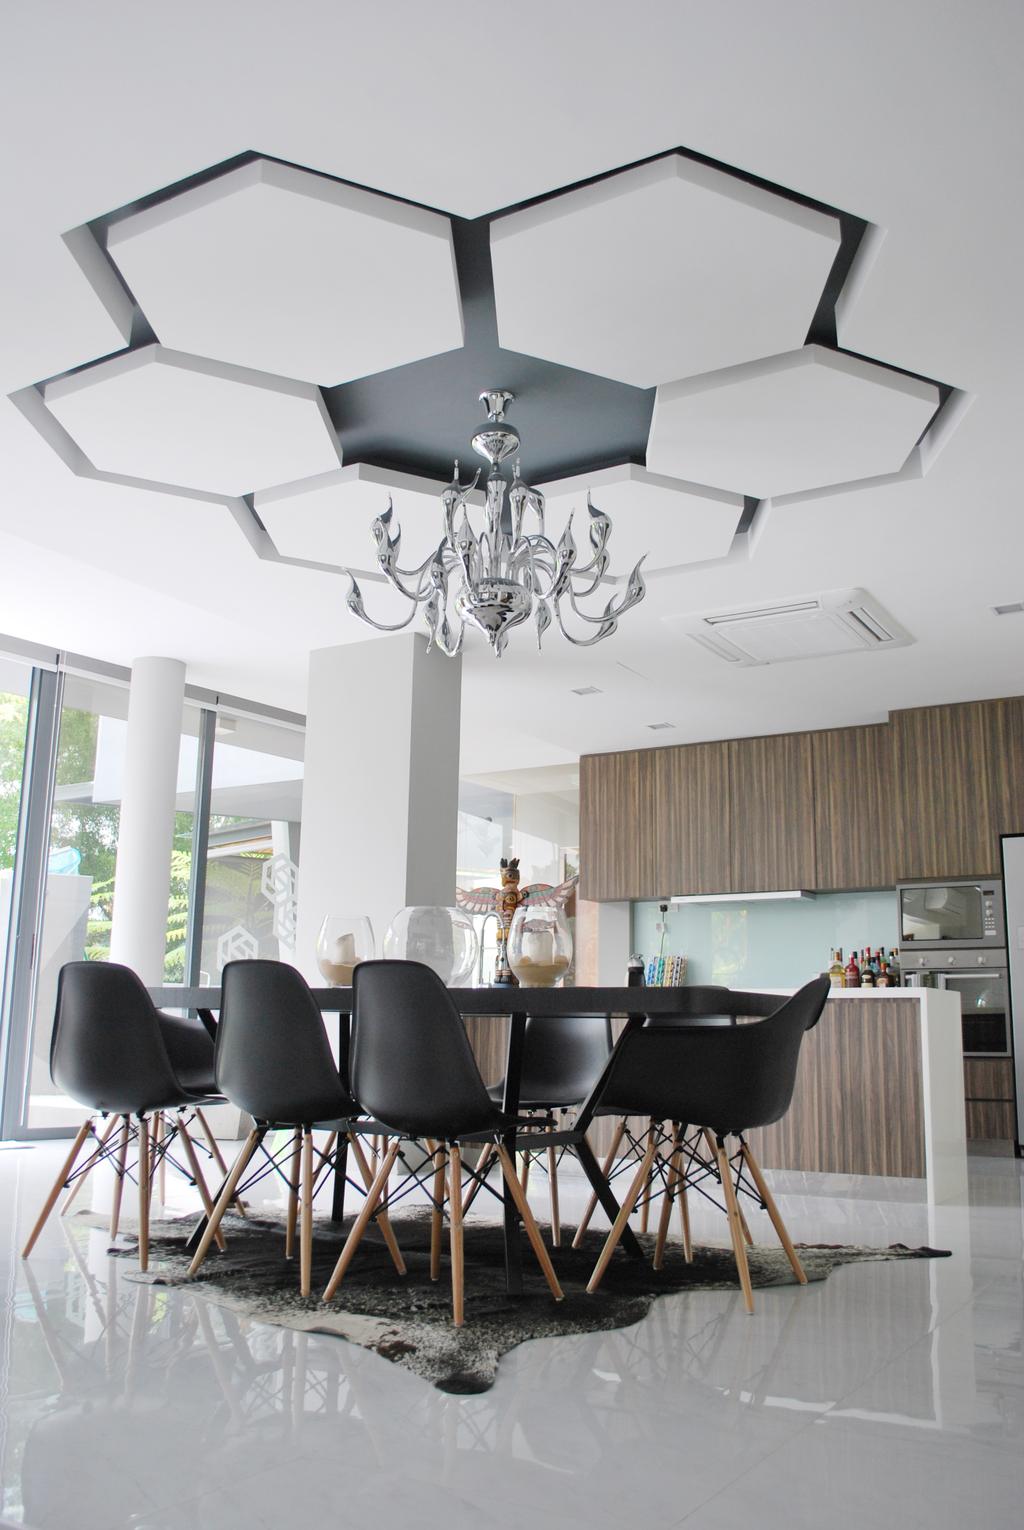 Contemporary, Landed, Dining Room, S House, Architect, Czarl Architects, Feature Ceiling, Wall Decor, Chandelier, Overhanging Light, Dining Chairs, Eames, Cowhide, Tiles, Cushion, Headrest, Home Decor, Indoors, Interior Design, Room, Chair, Furniture